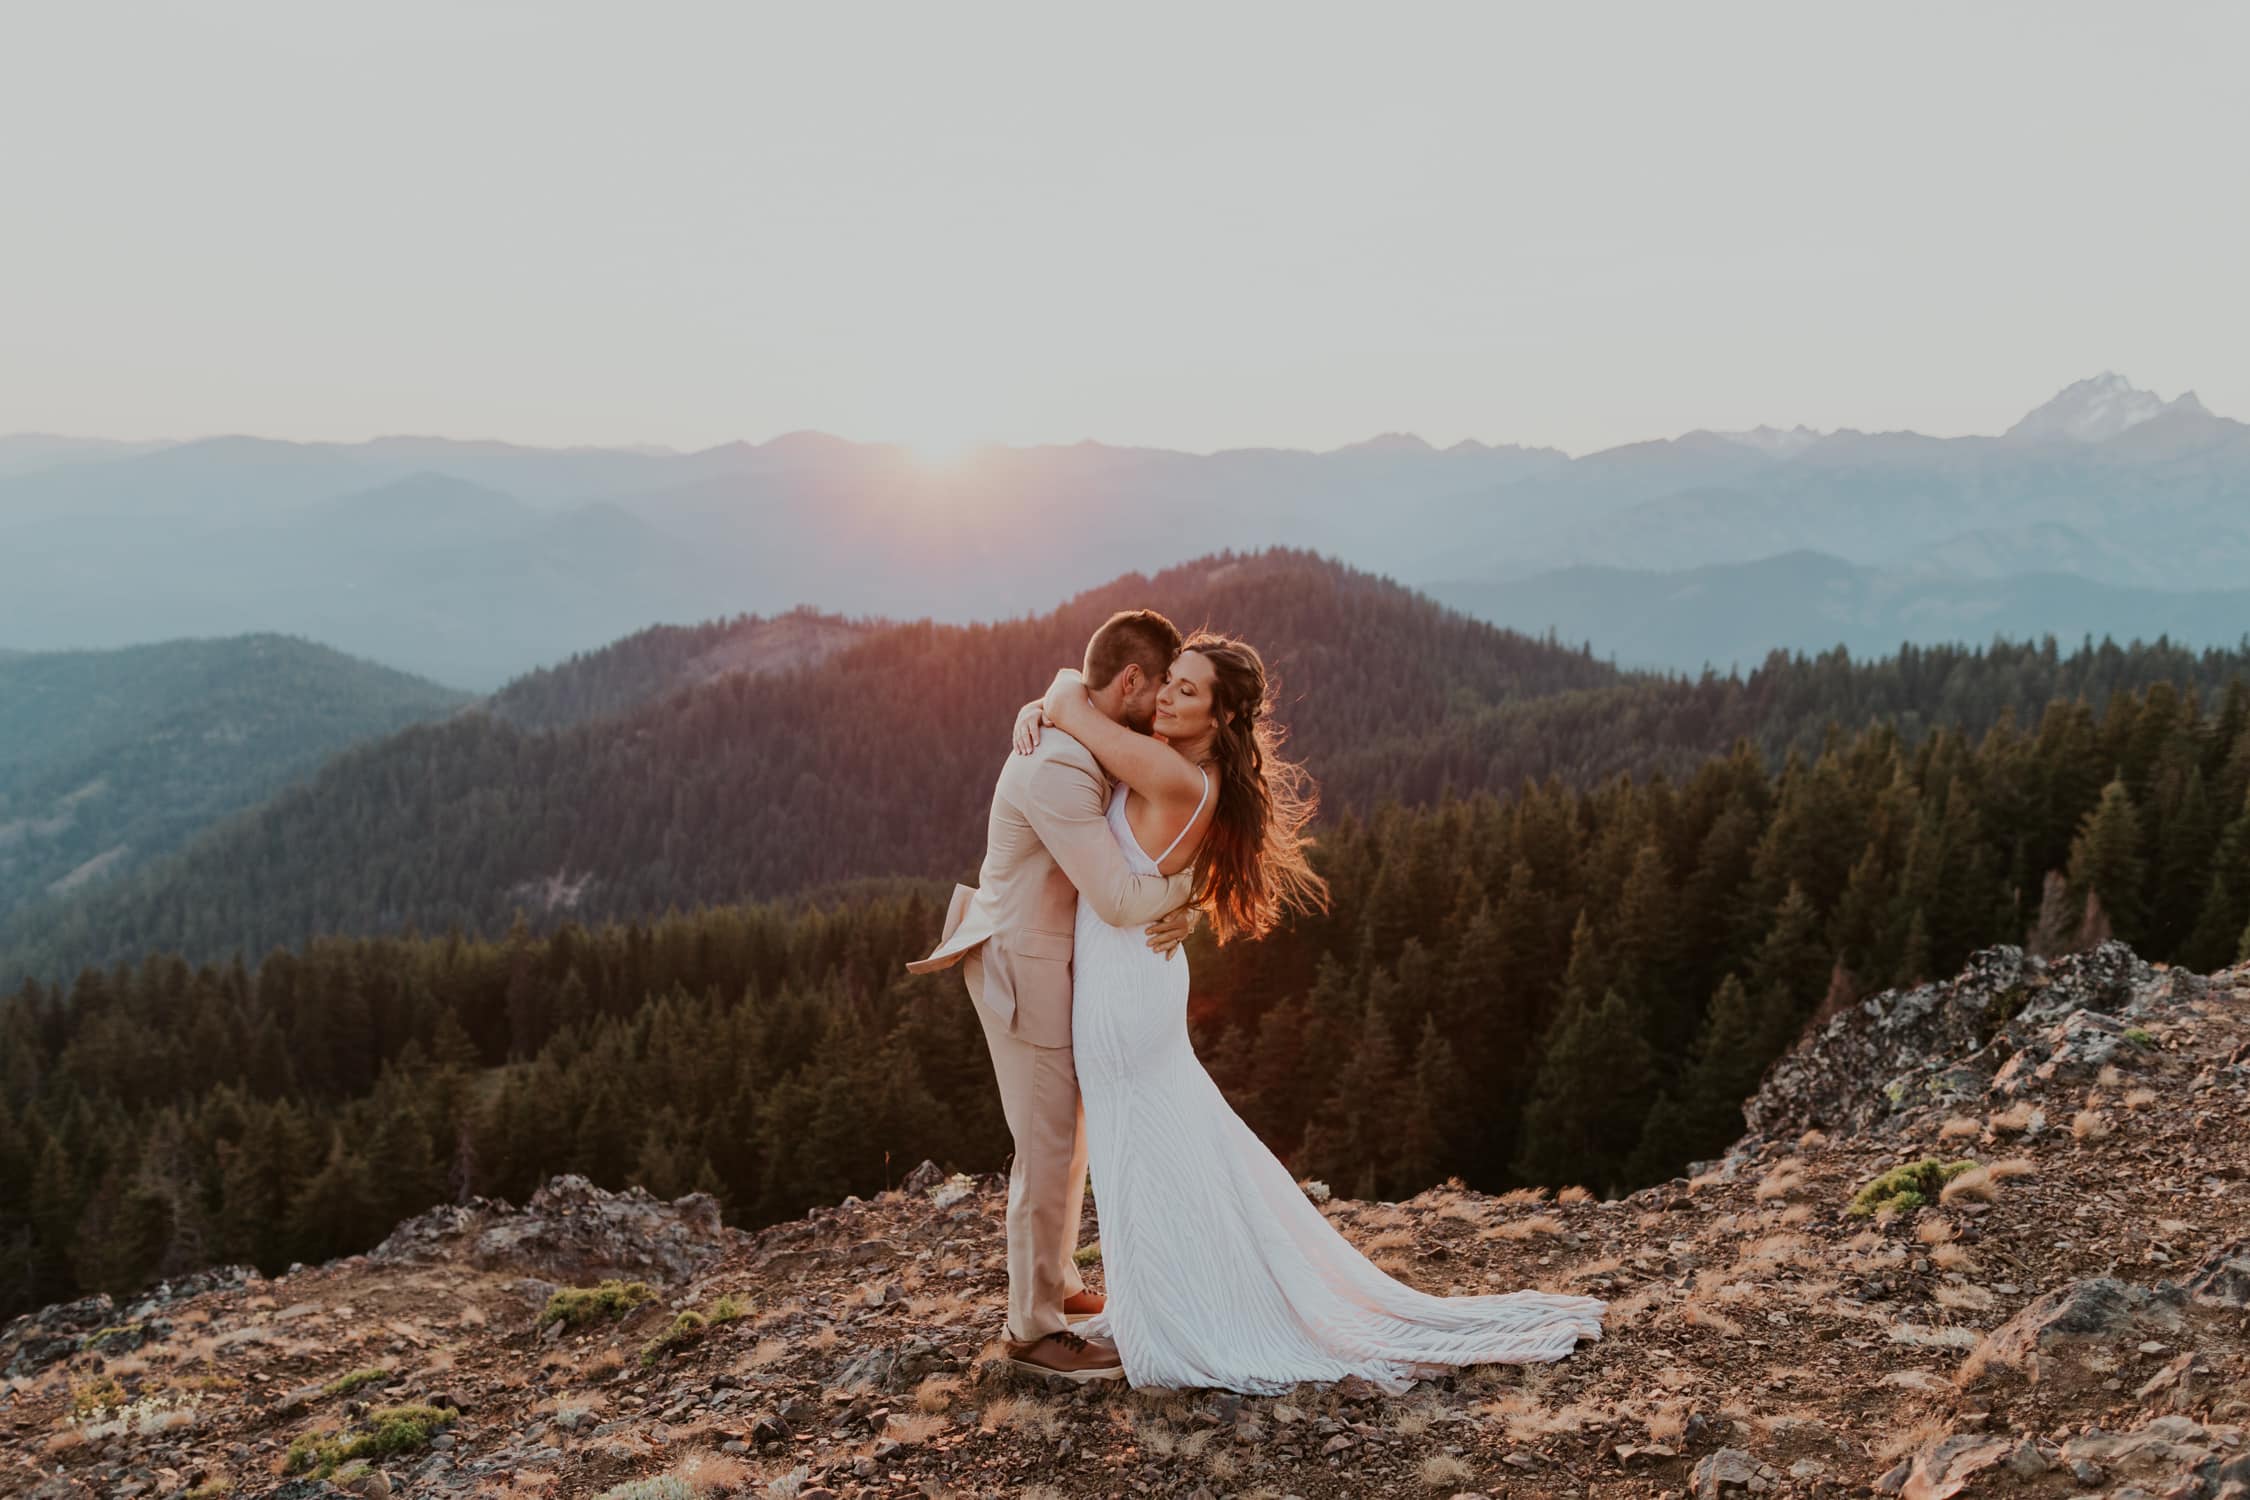 A bride and groom hugging each other on top of a mountain in Washington during golden hour.